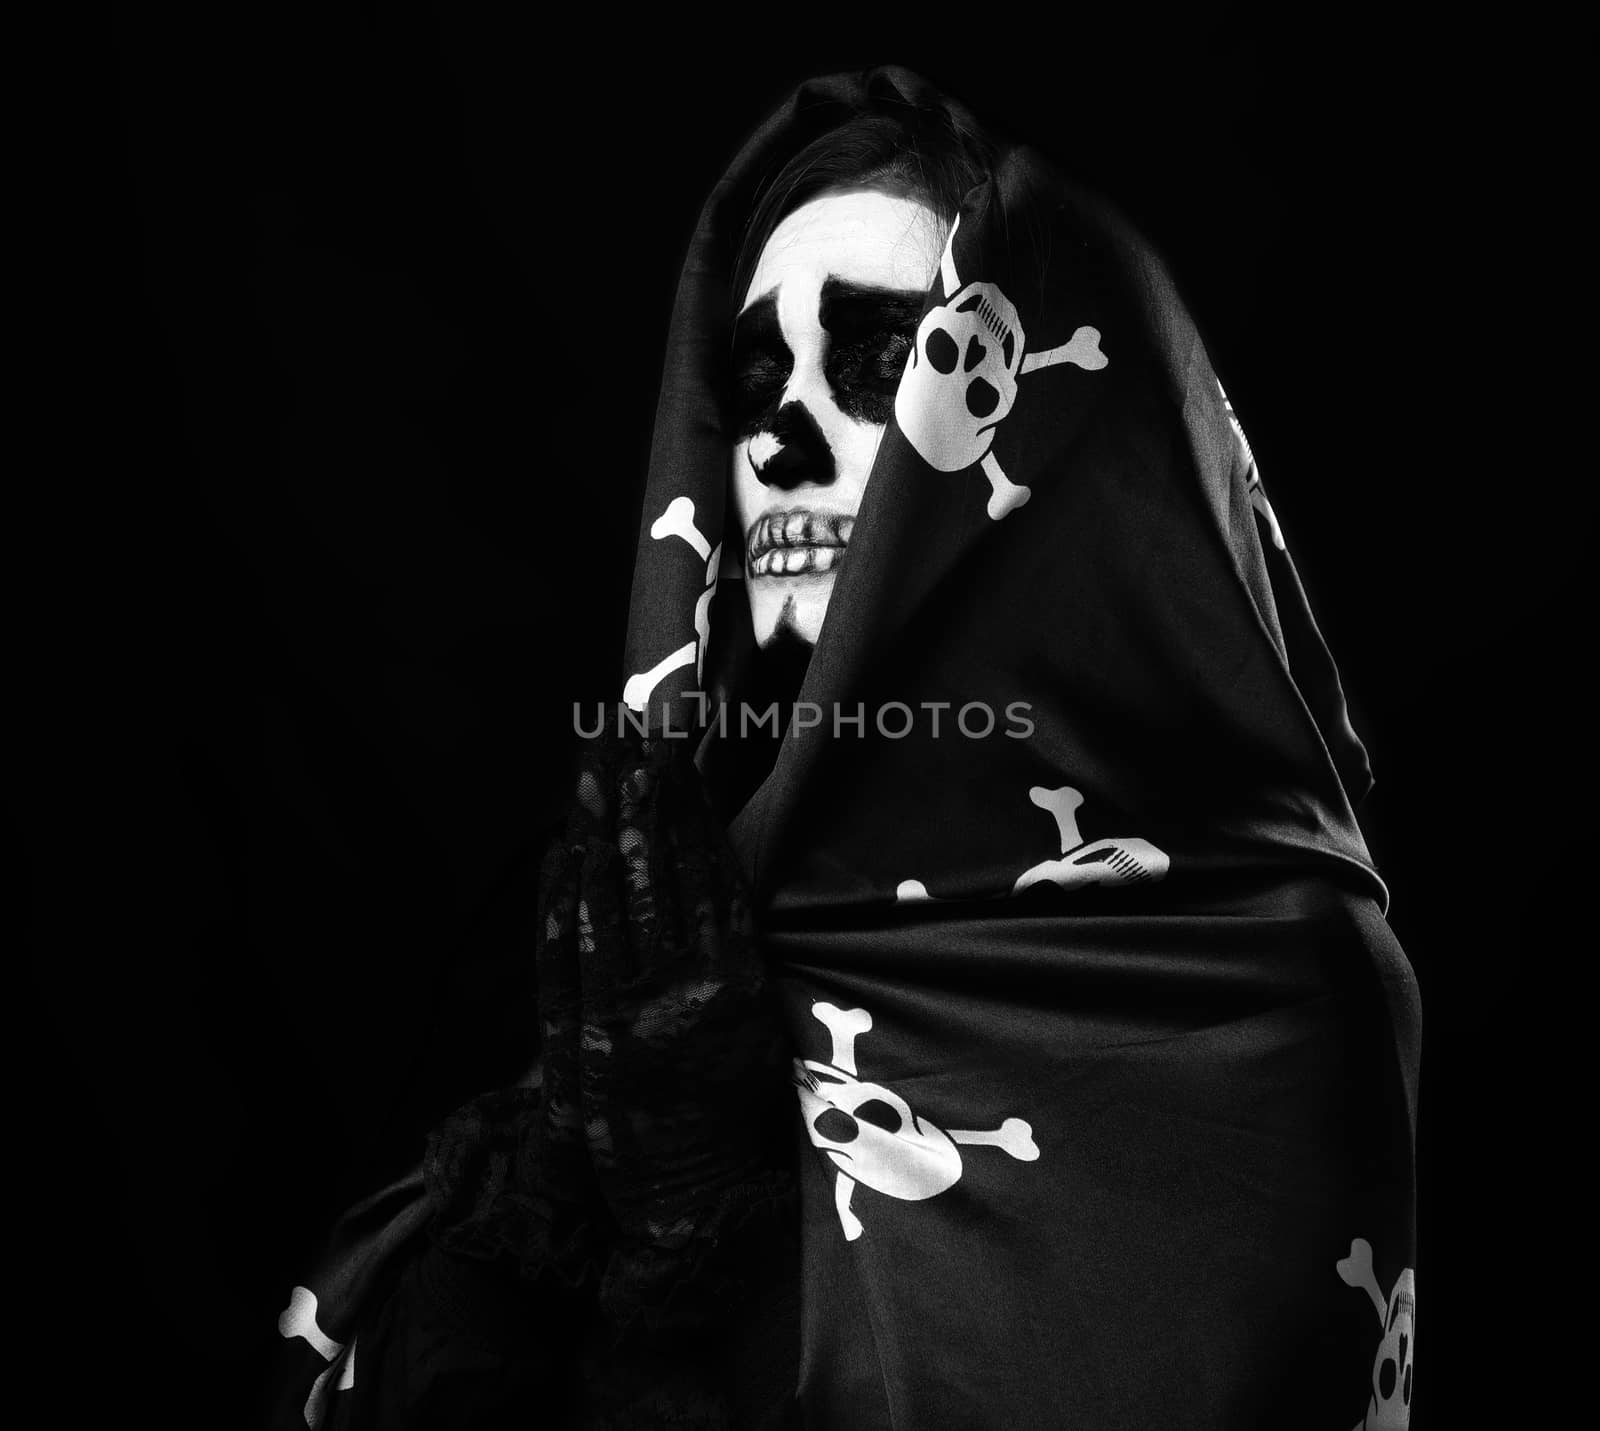 woman with skeleton make-up stands in prayer pose, wearing black silk cloak cape, black background